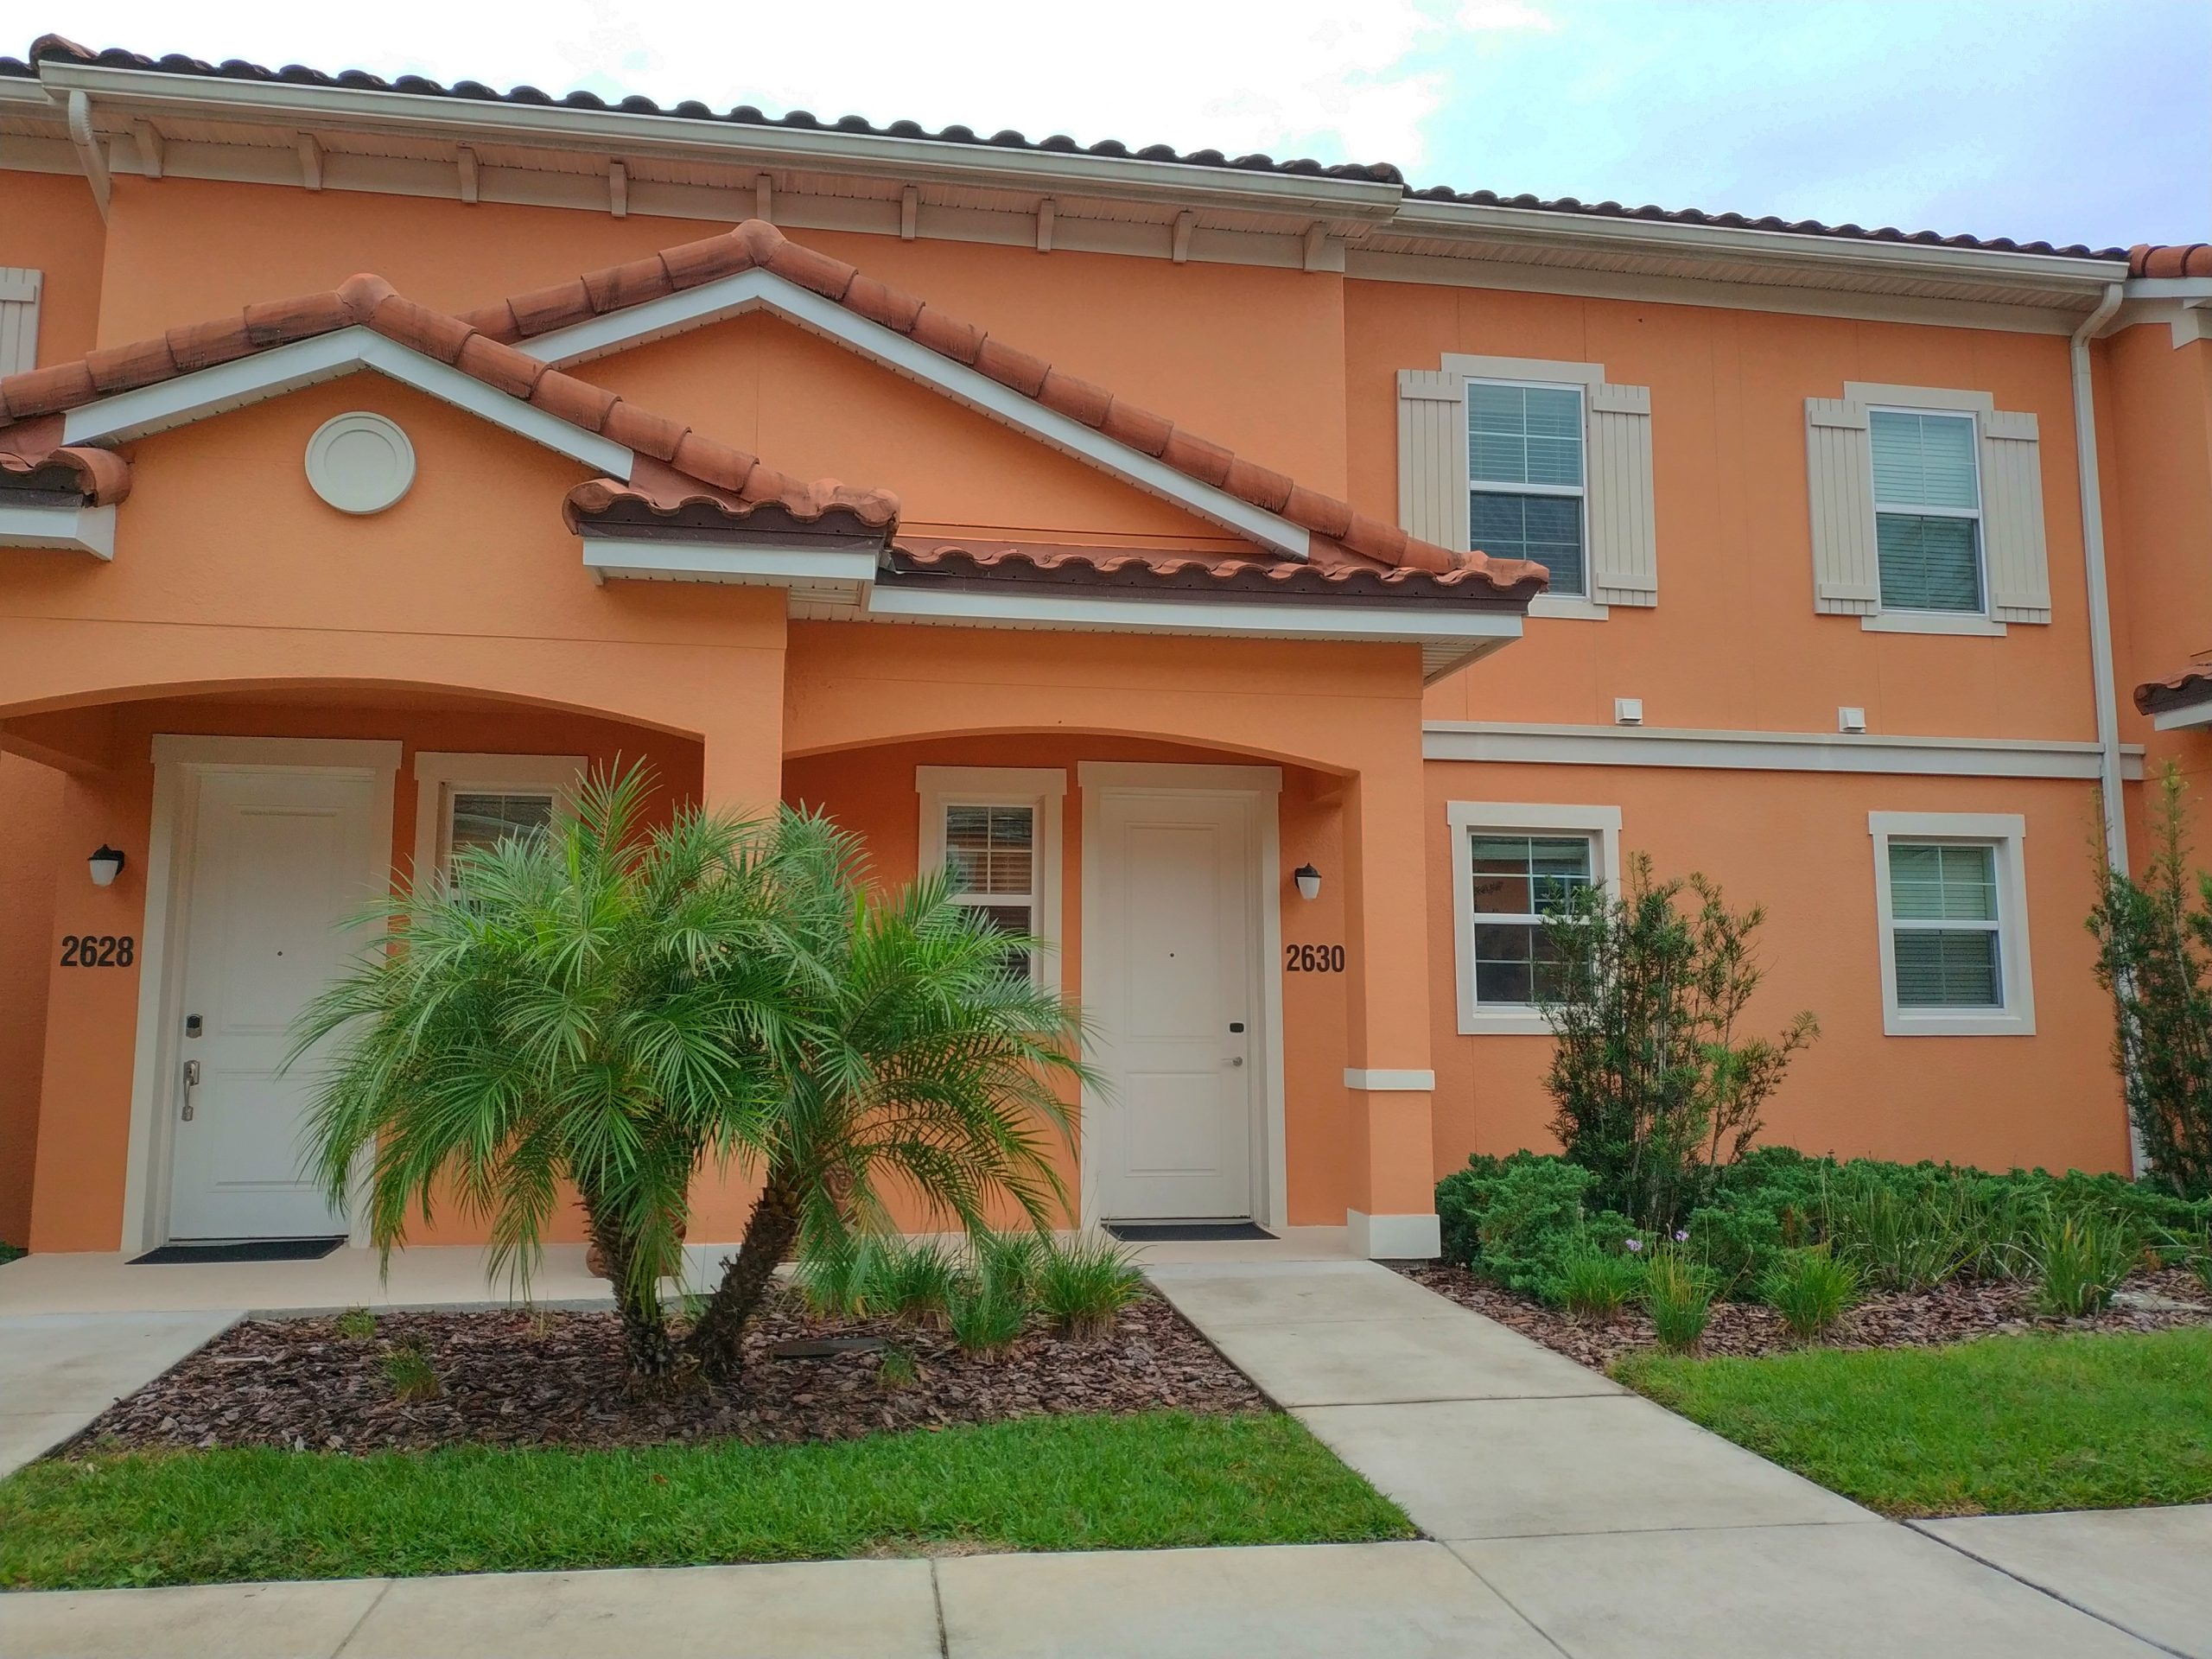 Regal Managers - Vacation Home Property Managers in Orlando, Kissimmee, Celebration